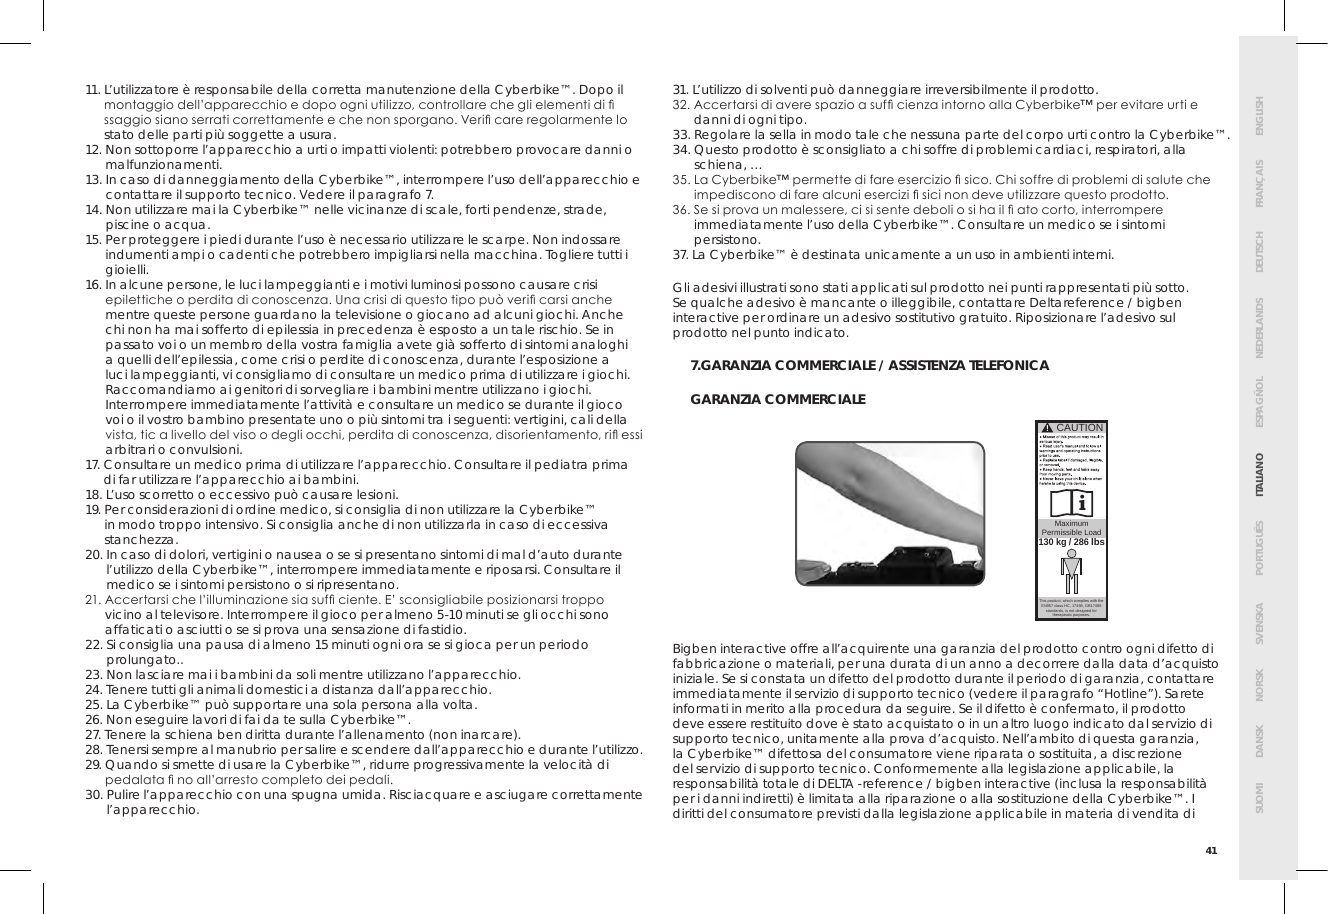 Page 45 of Bigben Interactive 5008B Handle bar unit for cyberbike User Manual SMG CYBERBIKE EUR indd